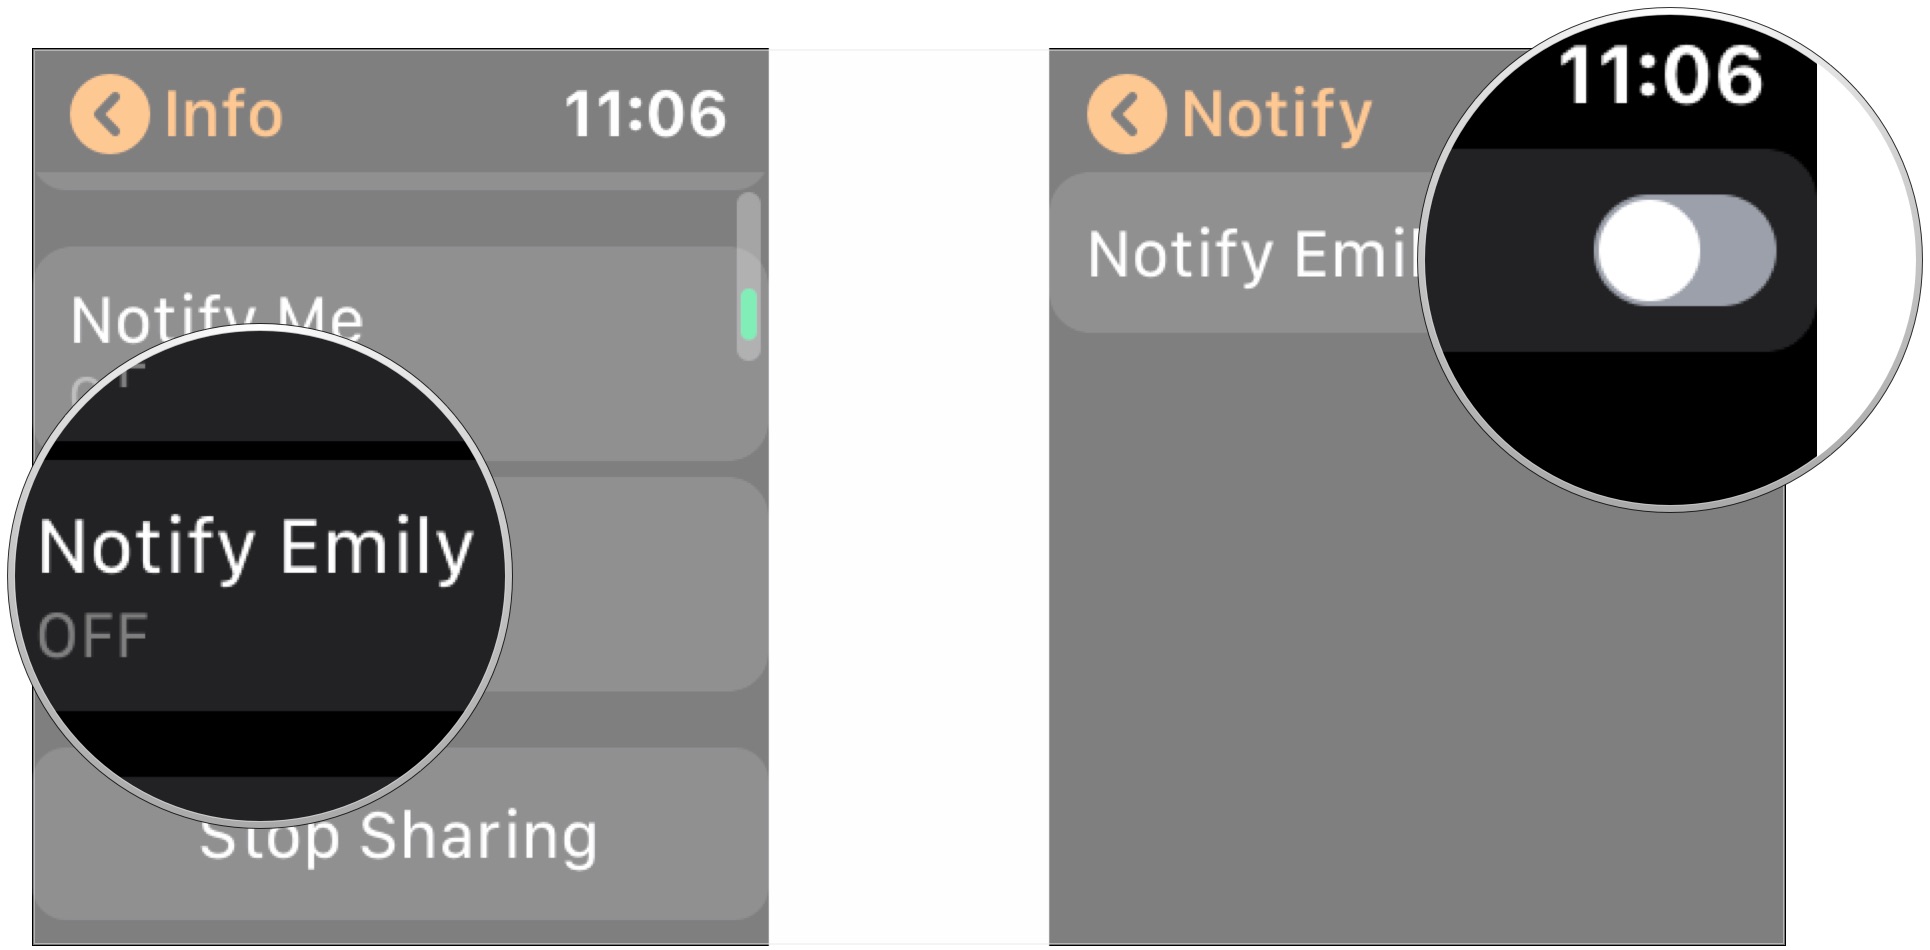 Tap Notify Contact, tap switch